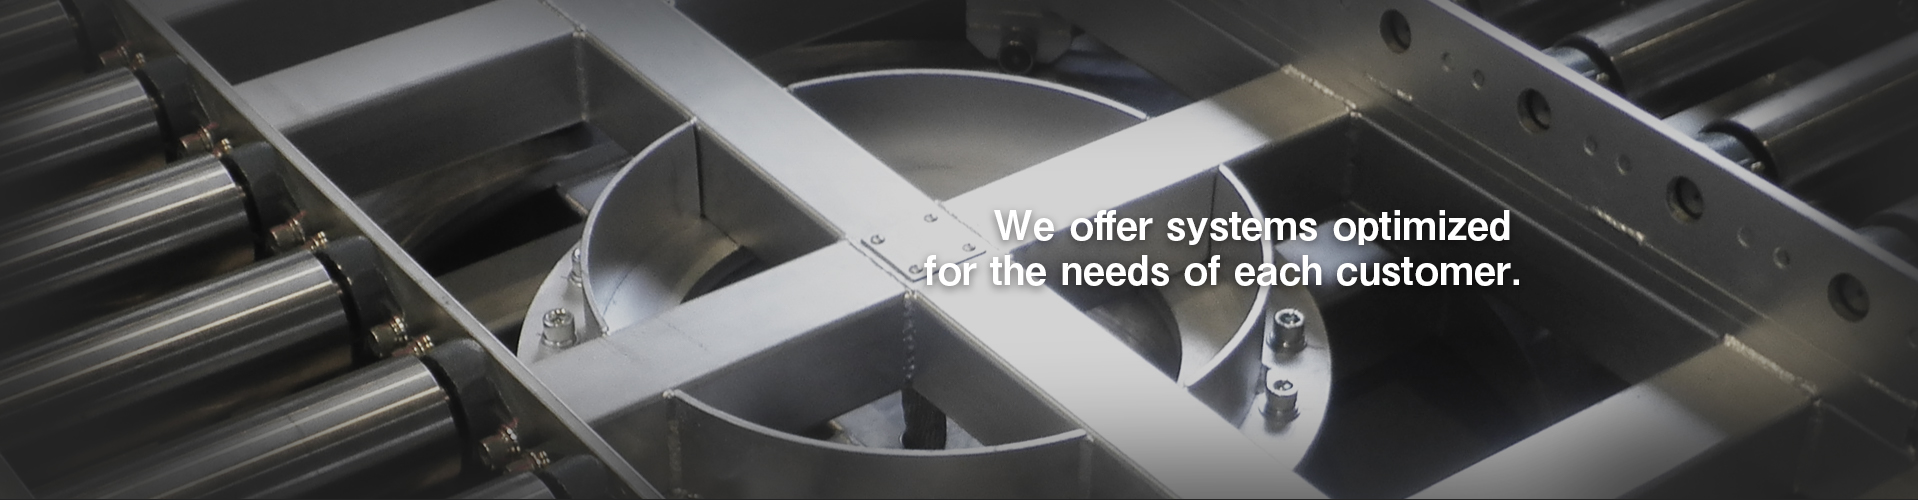 We offer systems optimized for the needs of each customer.